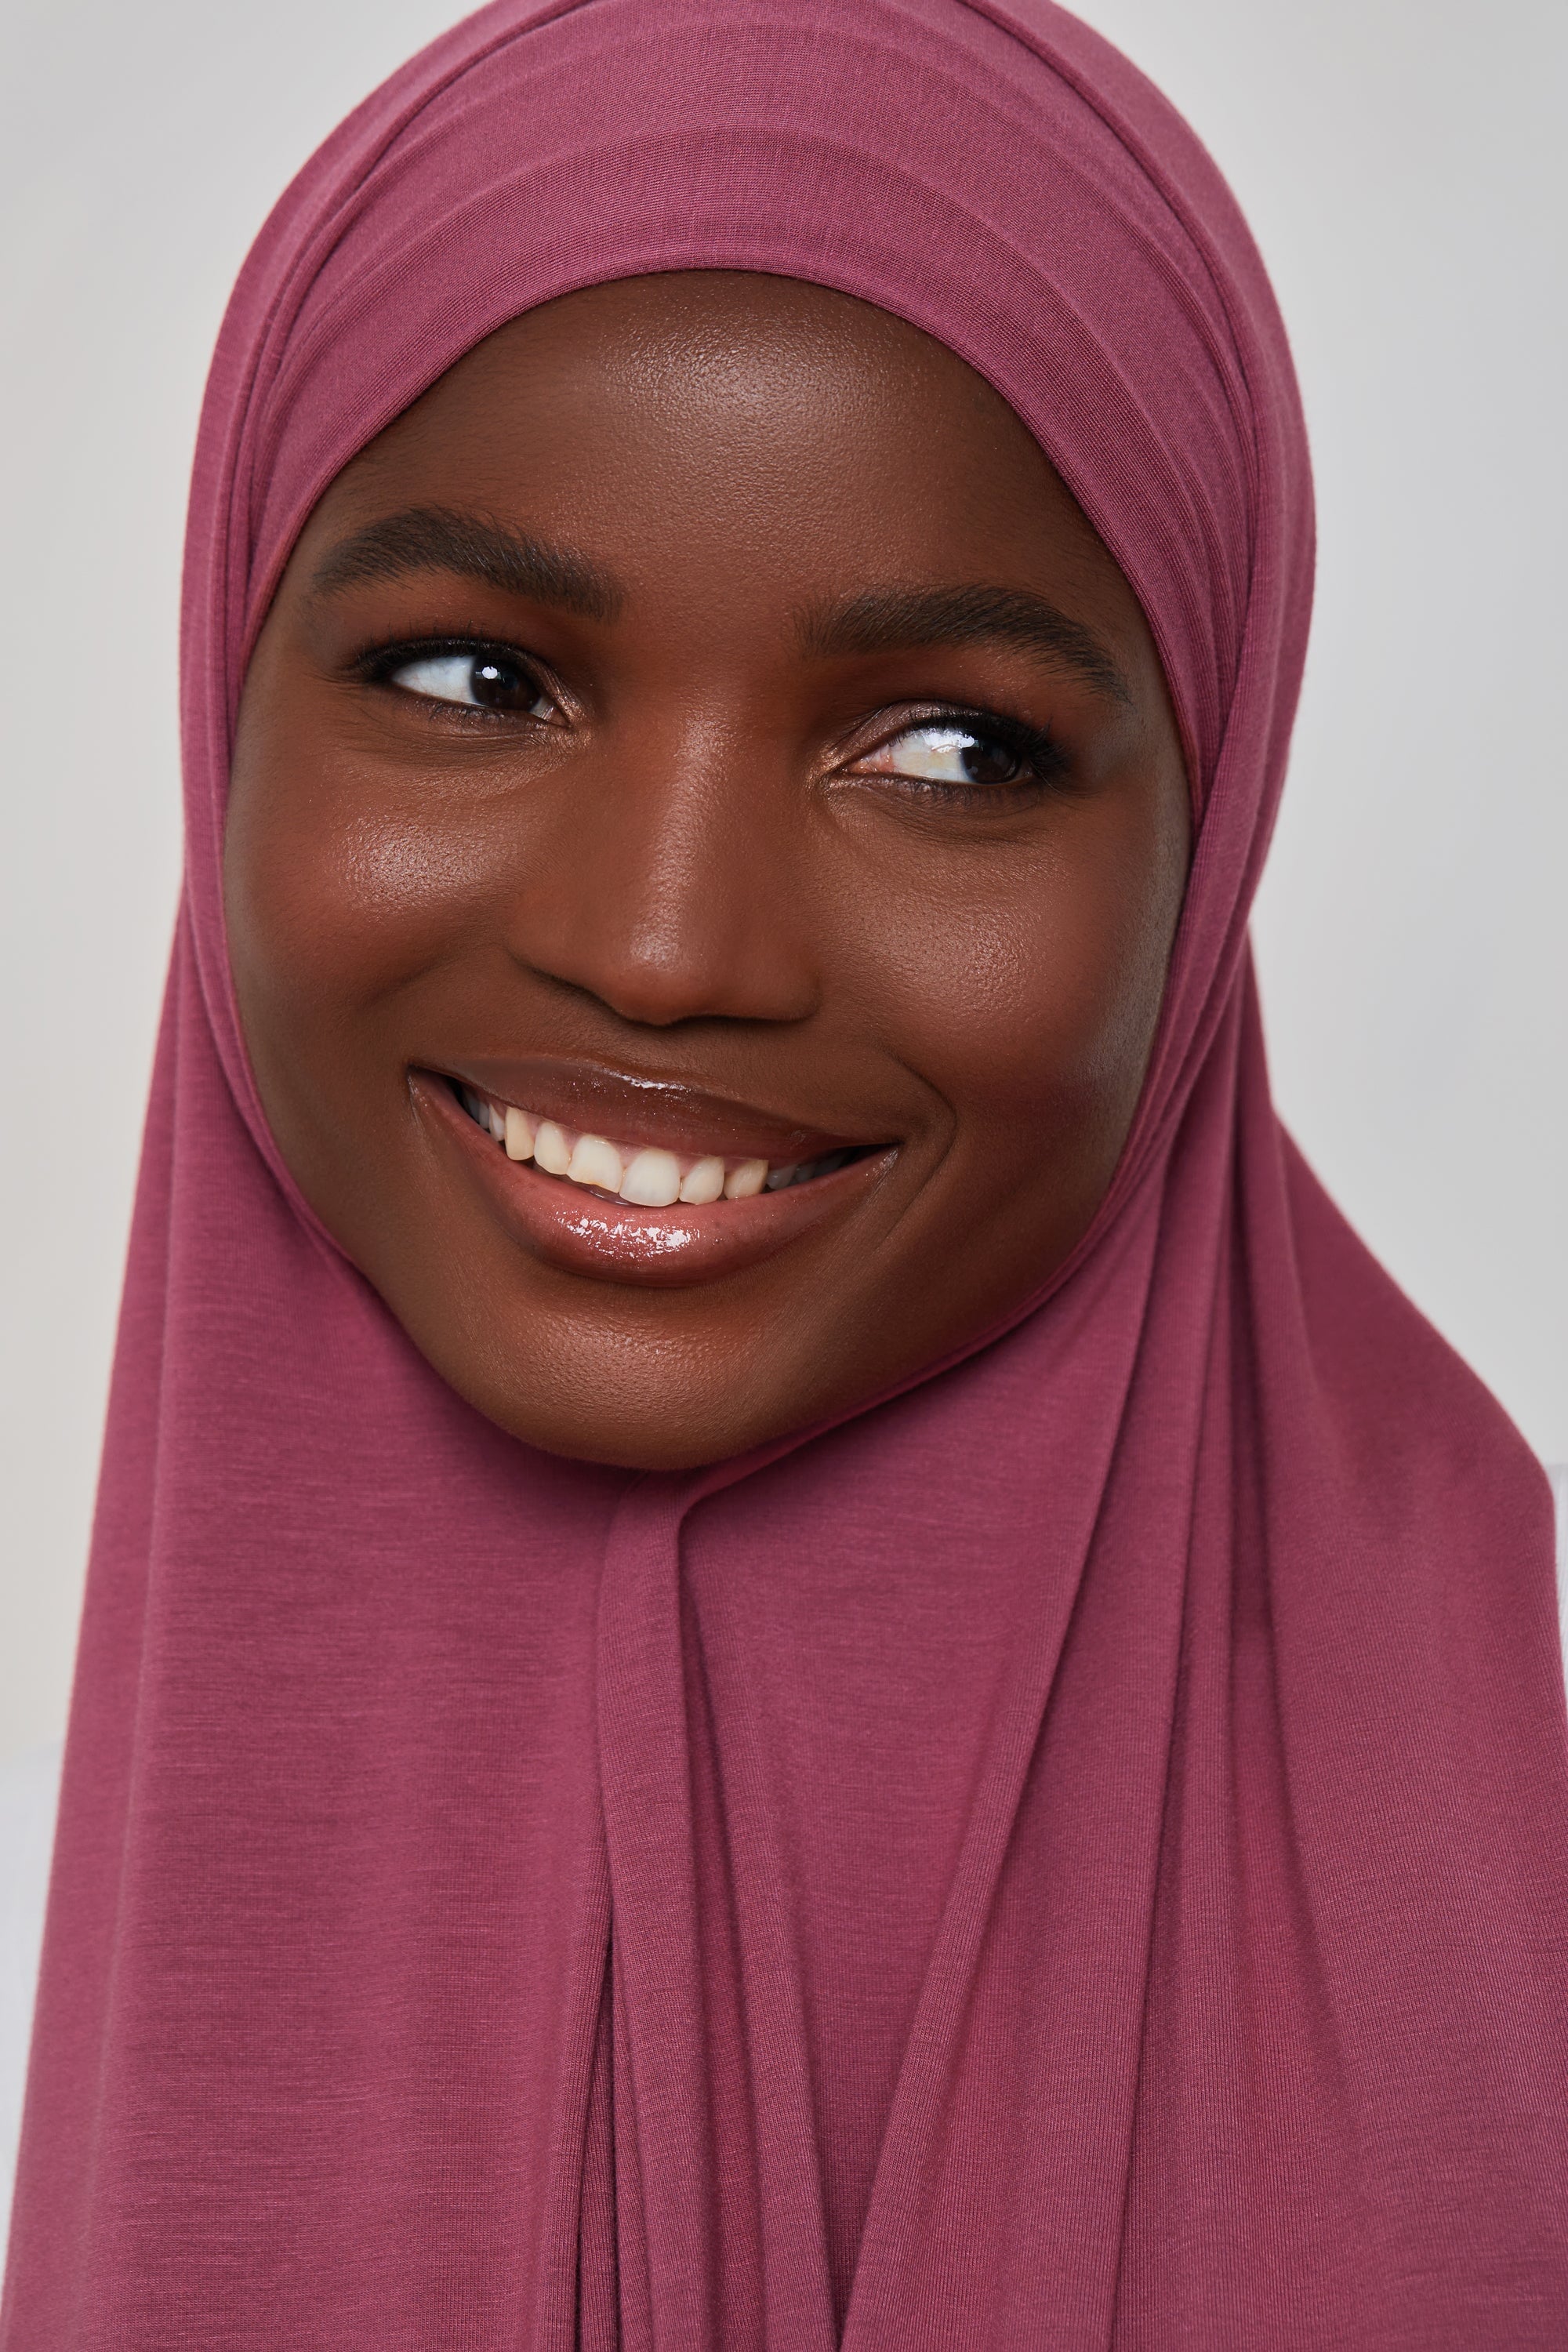 Bamboo Jersey Hijab - Dry Rose epschoolboard 